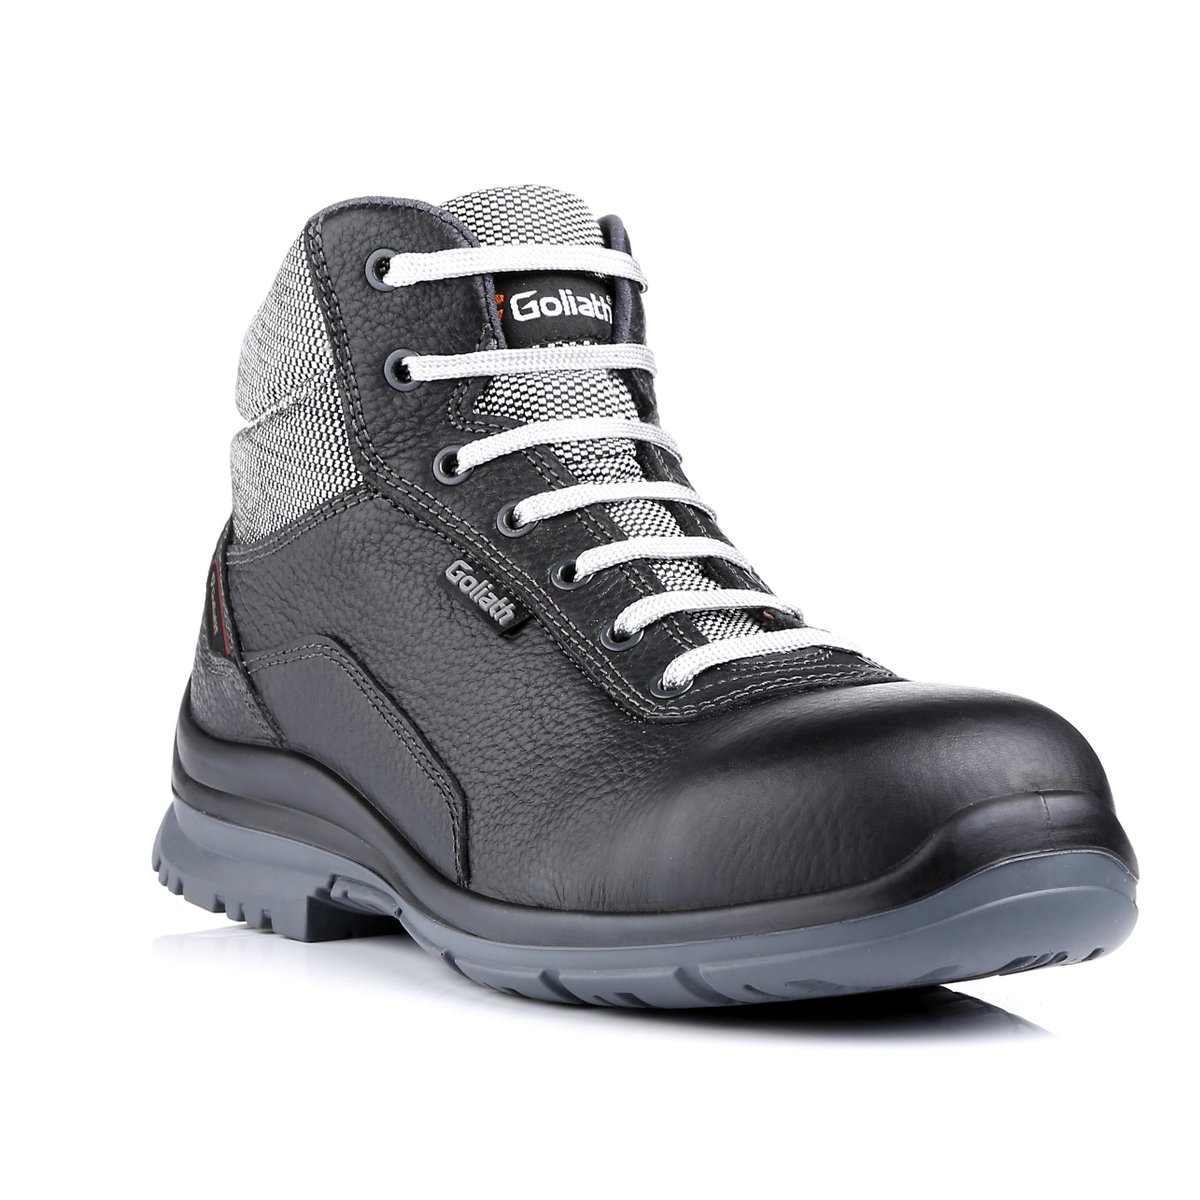 goliath gore tex boots,Limited Time